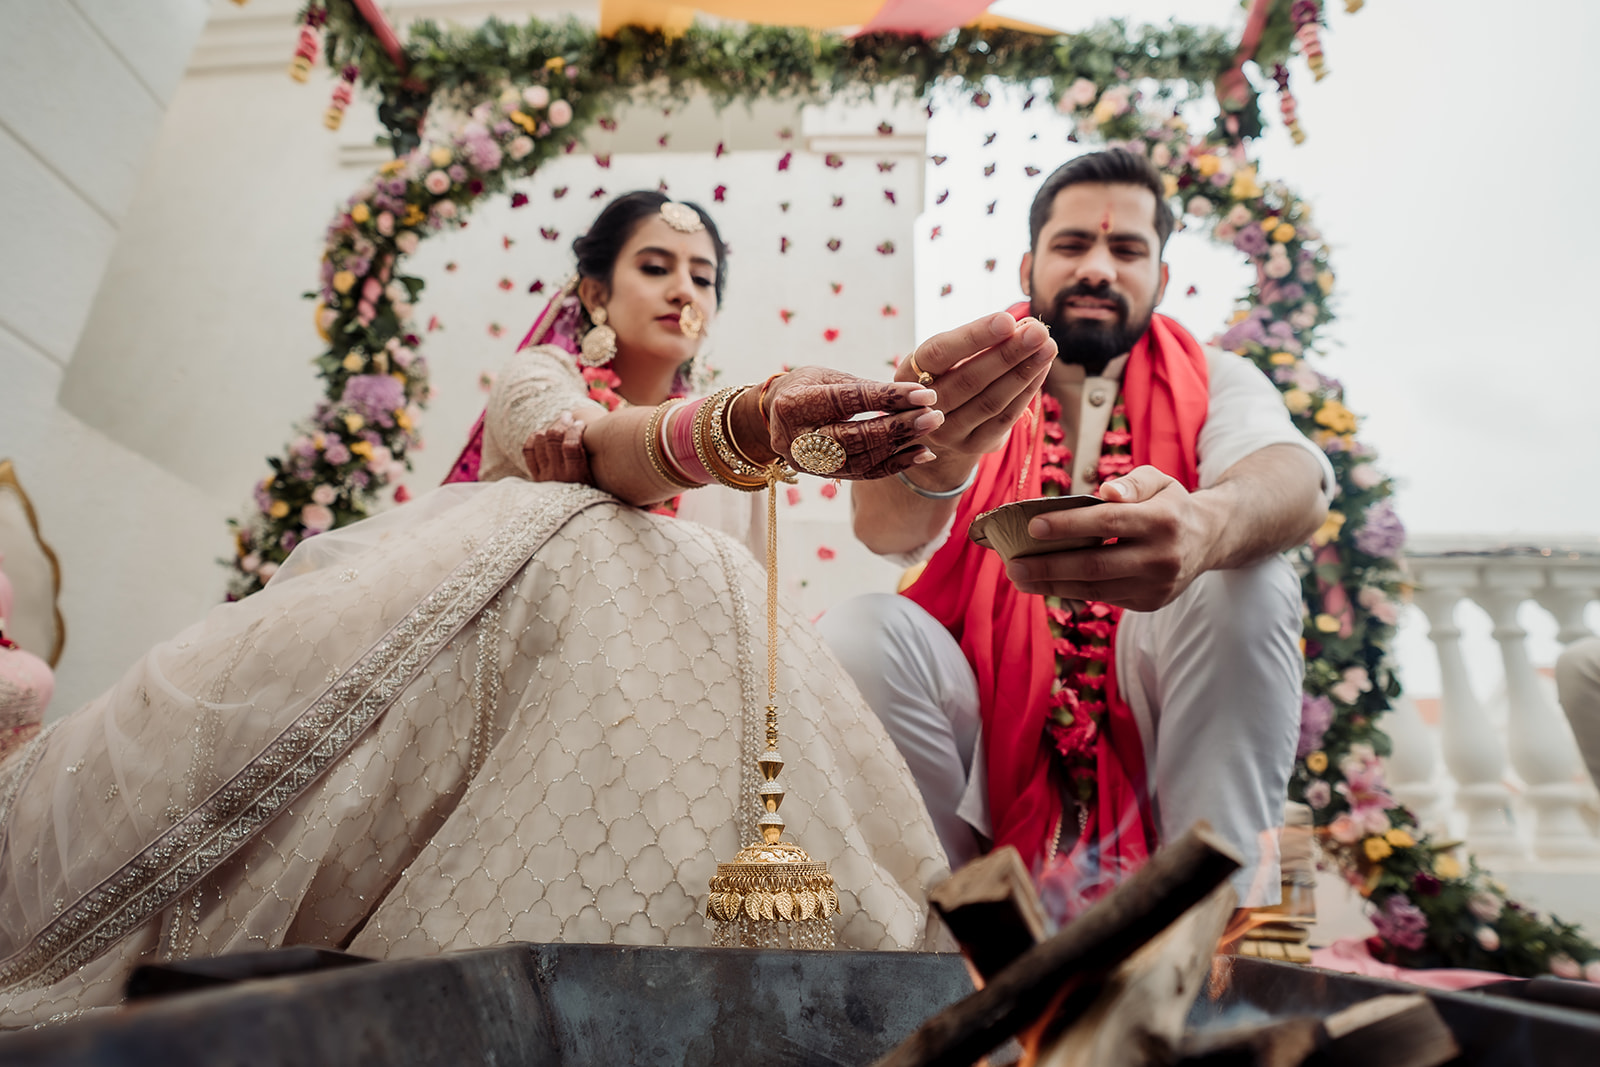 Rituals in focus: A snapshot of the rich cultural and emotional moments during wedding ceremonies